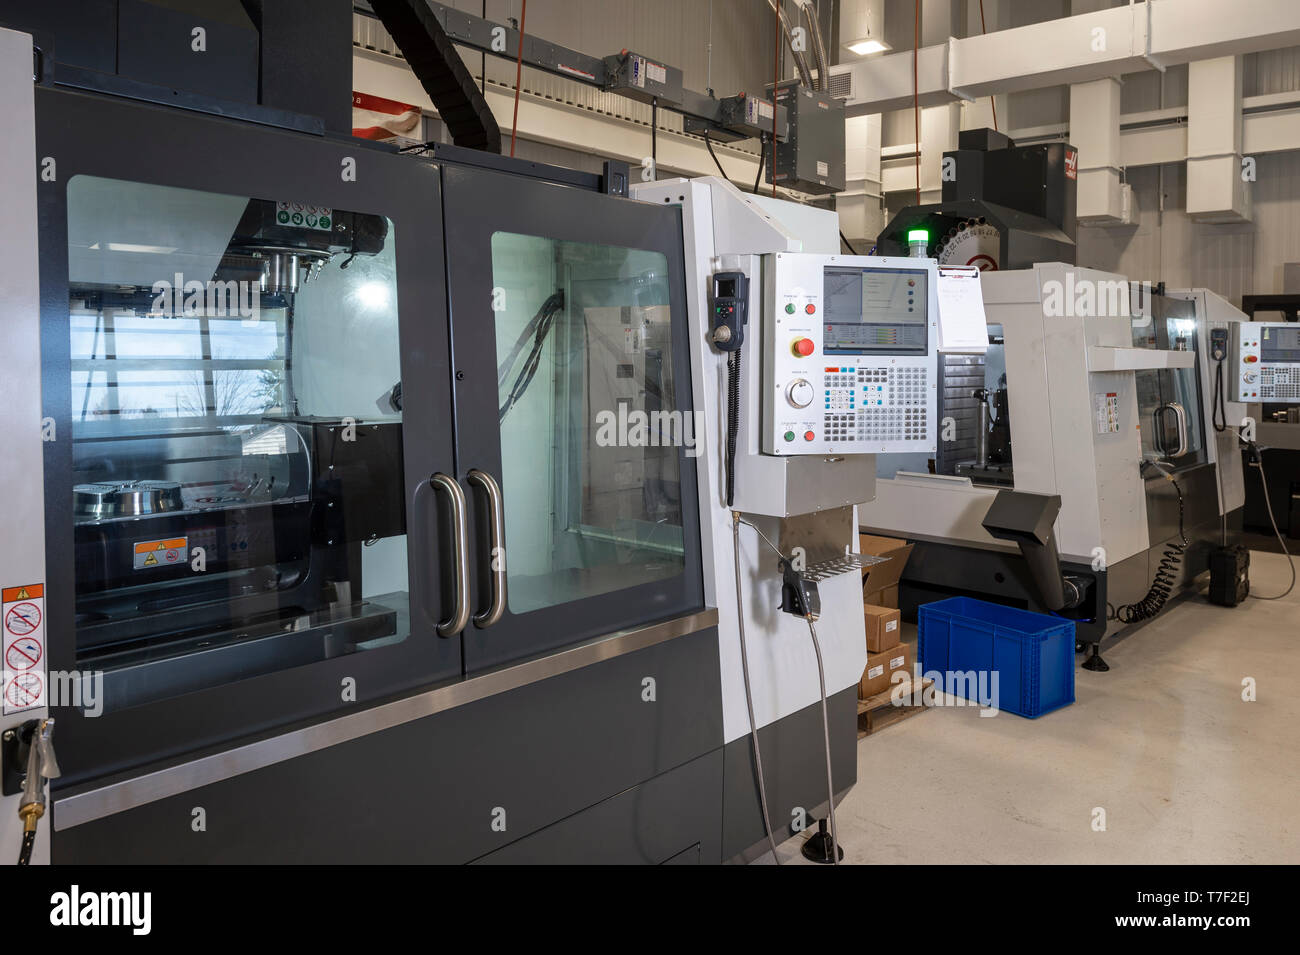 Automated Milling Lathe Machines  In Factory Stock Photo